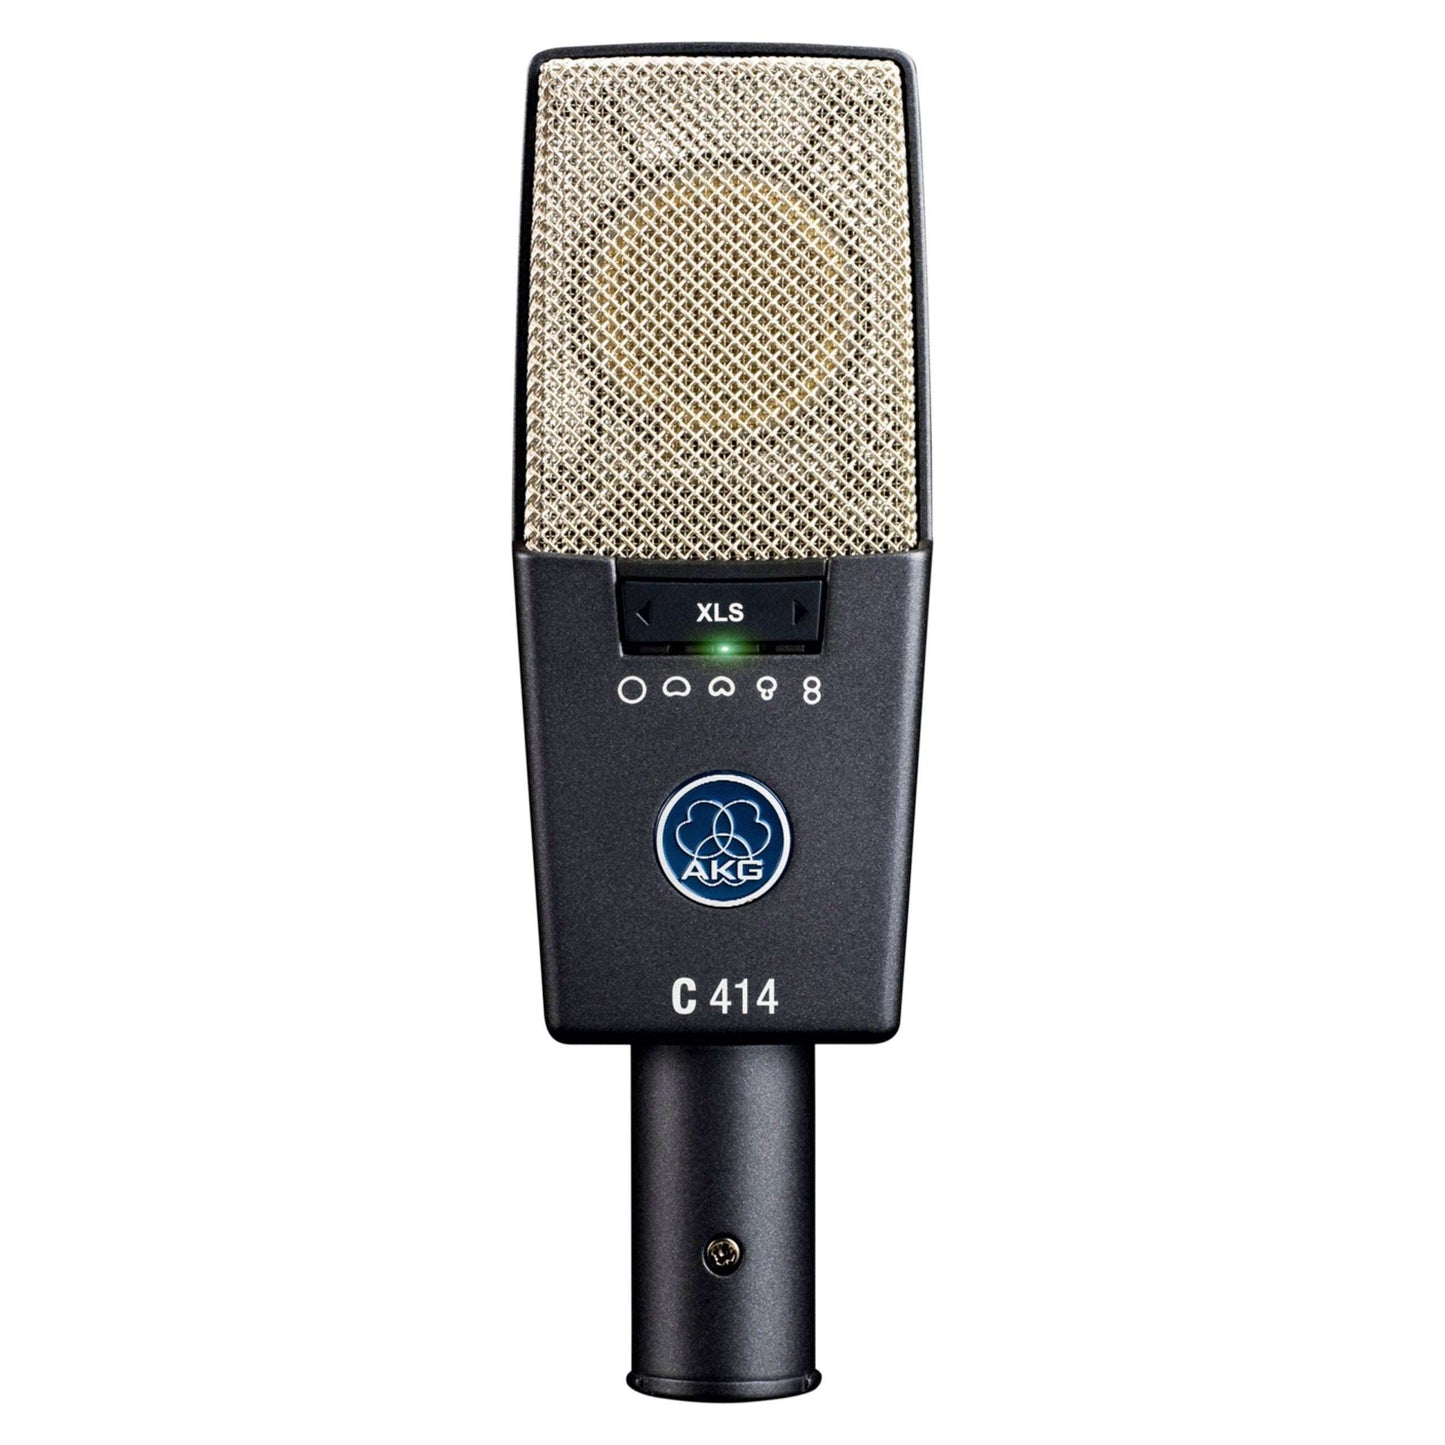 AKG C414 XLS Reference multipattern condenser microphone - Aron Soitin